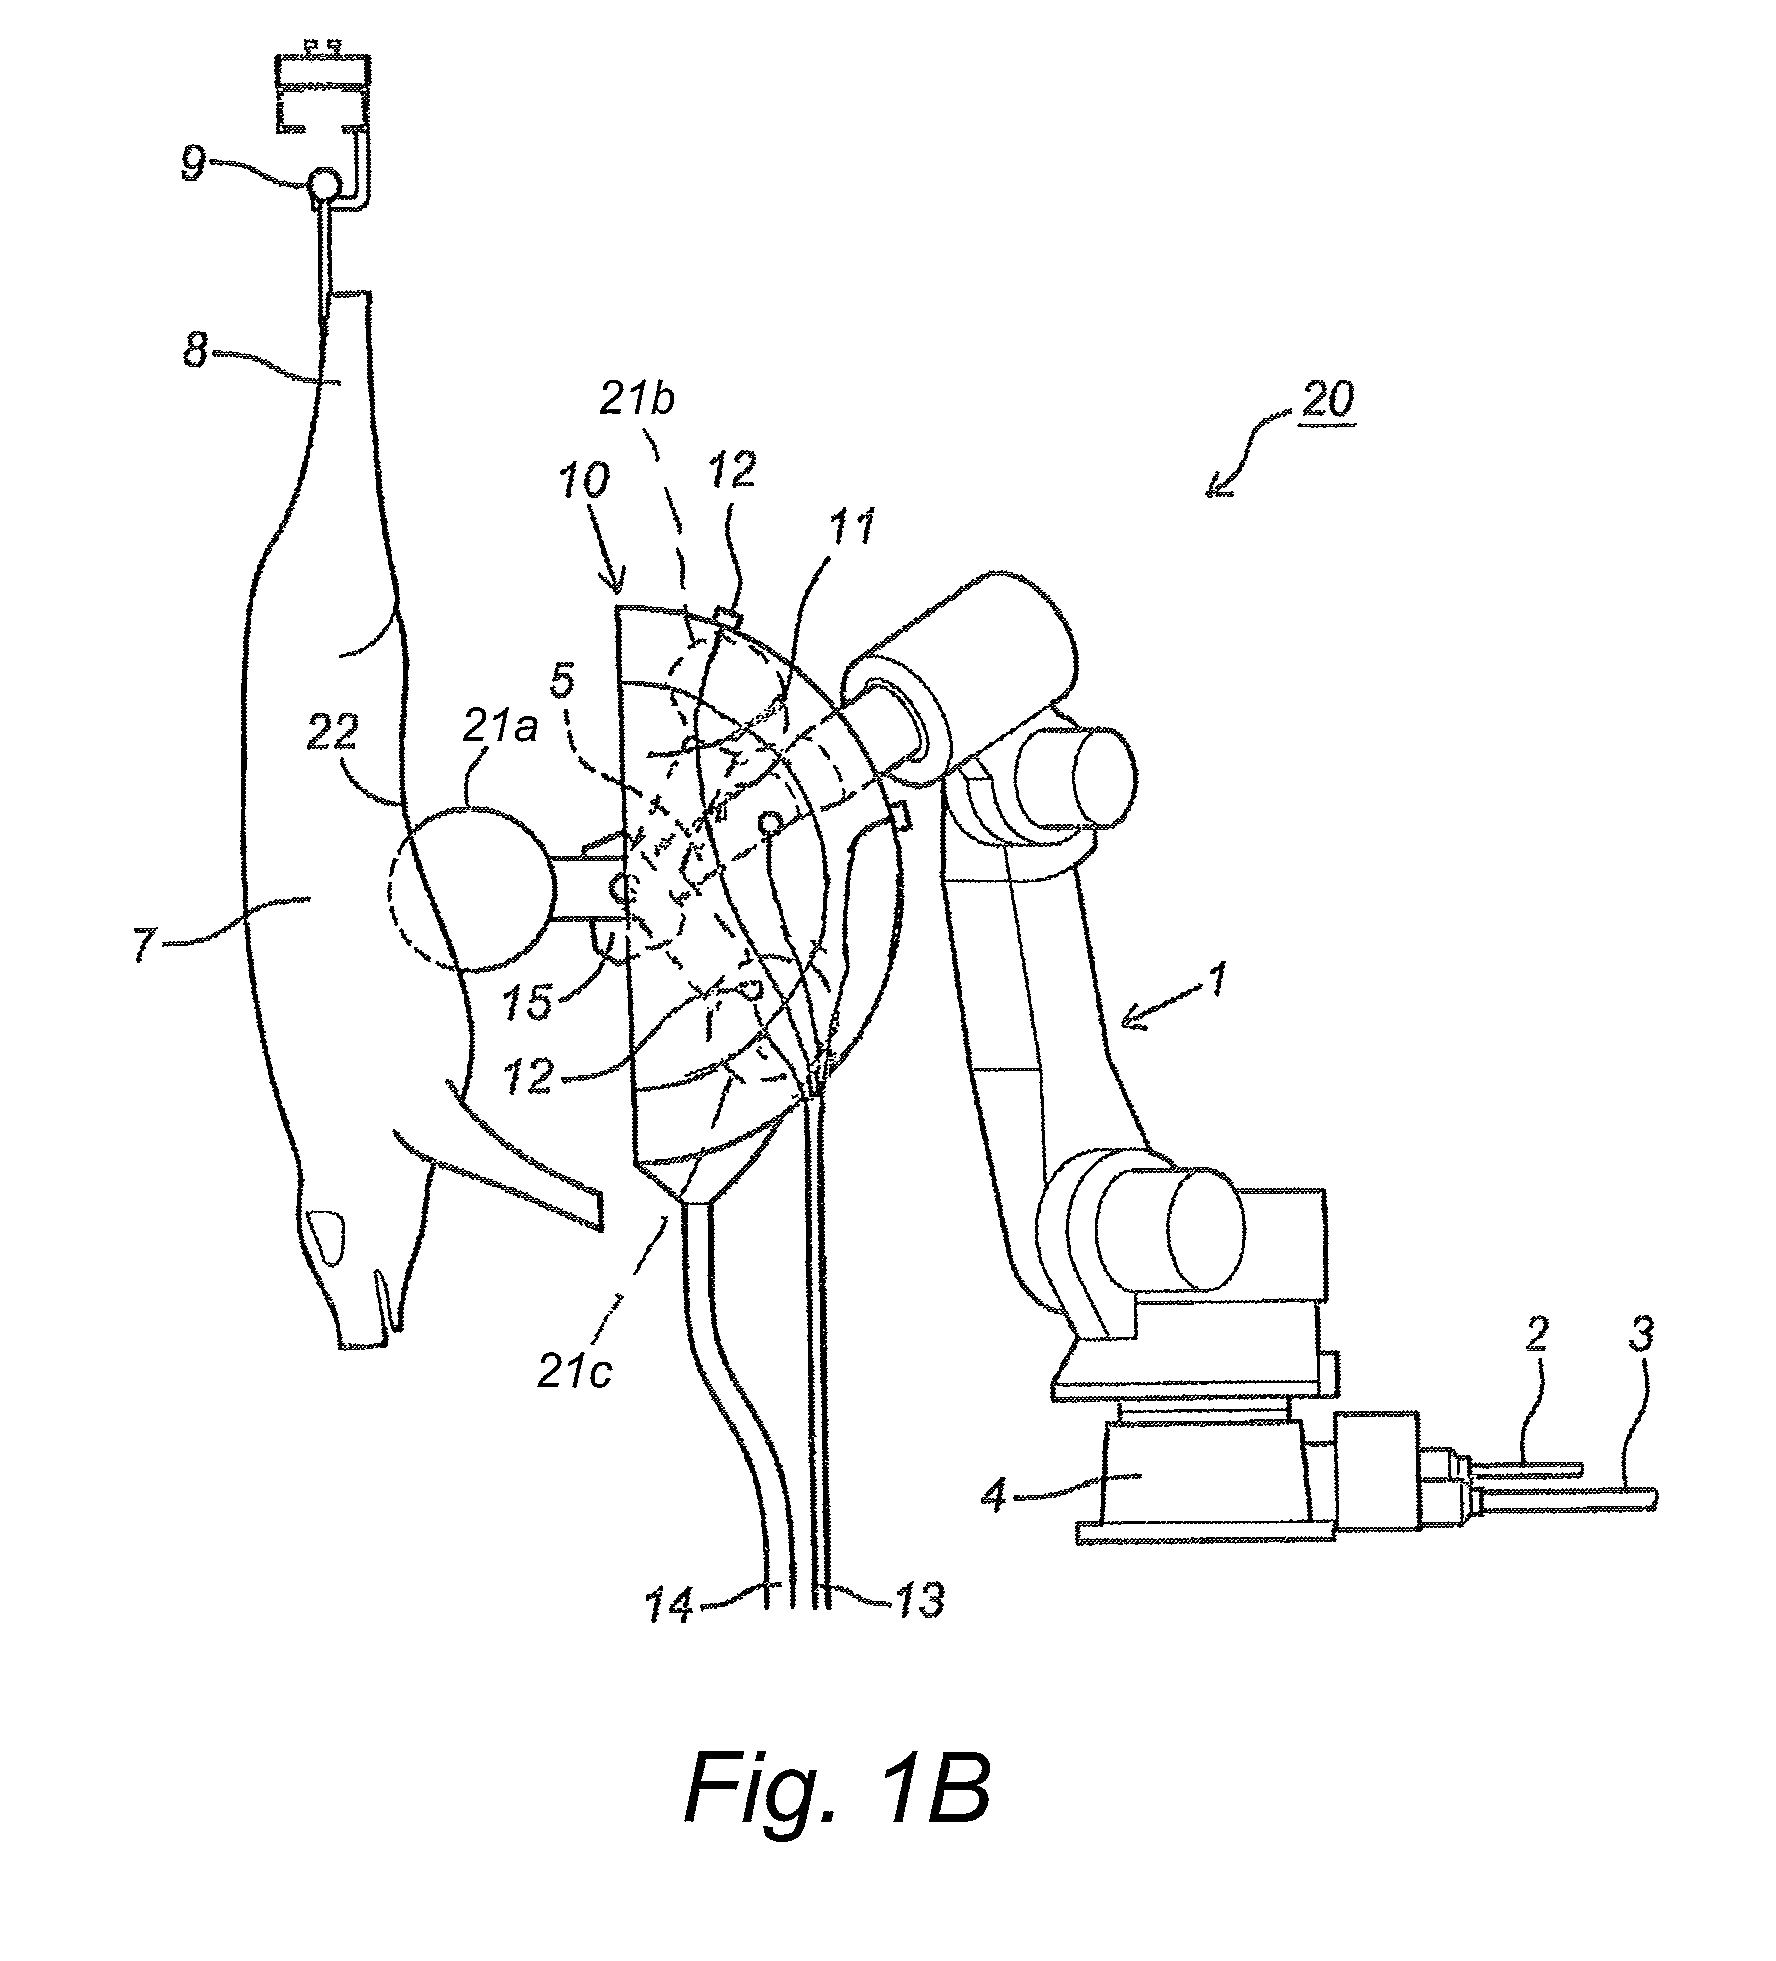 Device and method for processing carcasses of livestock